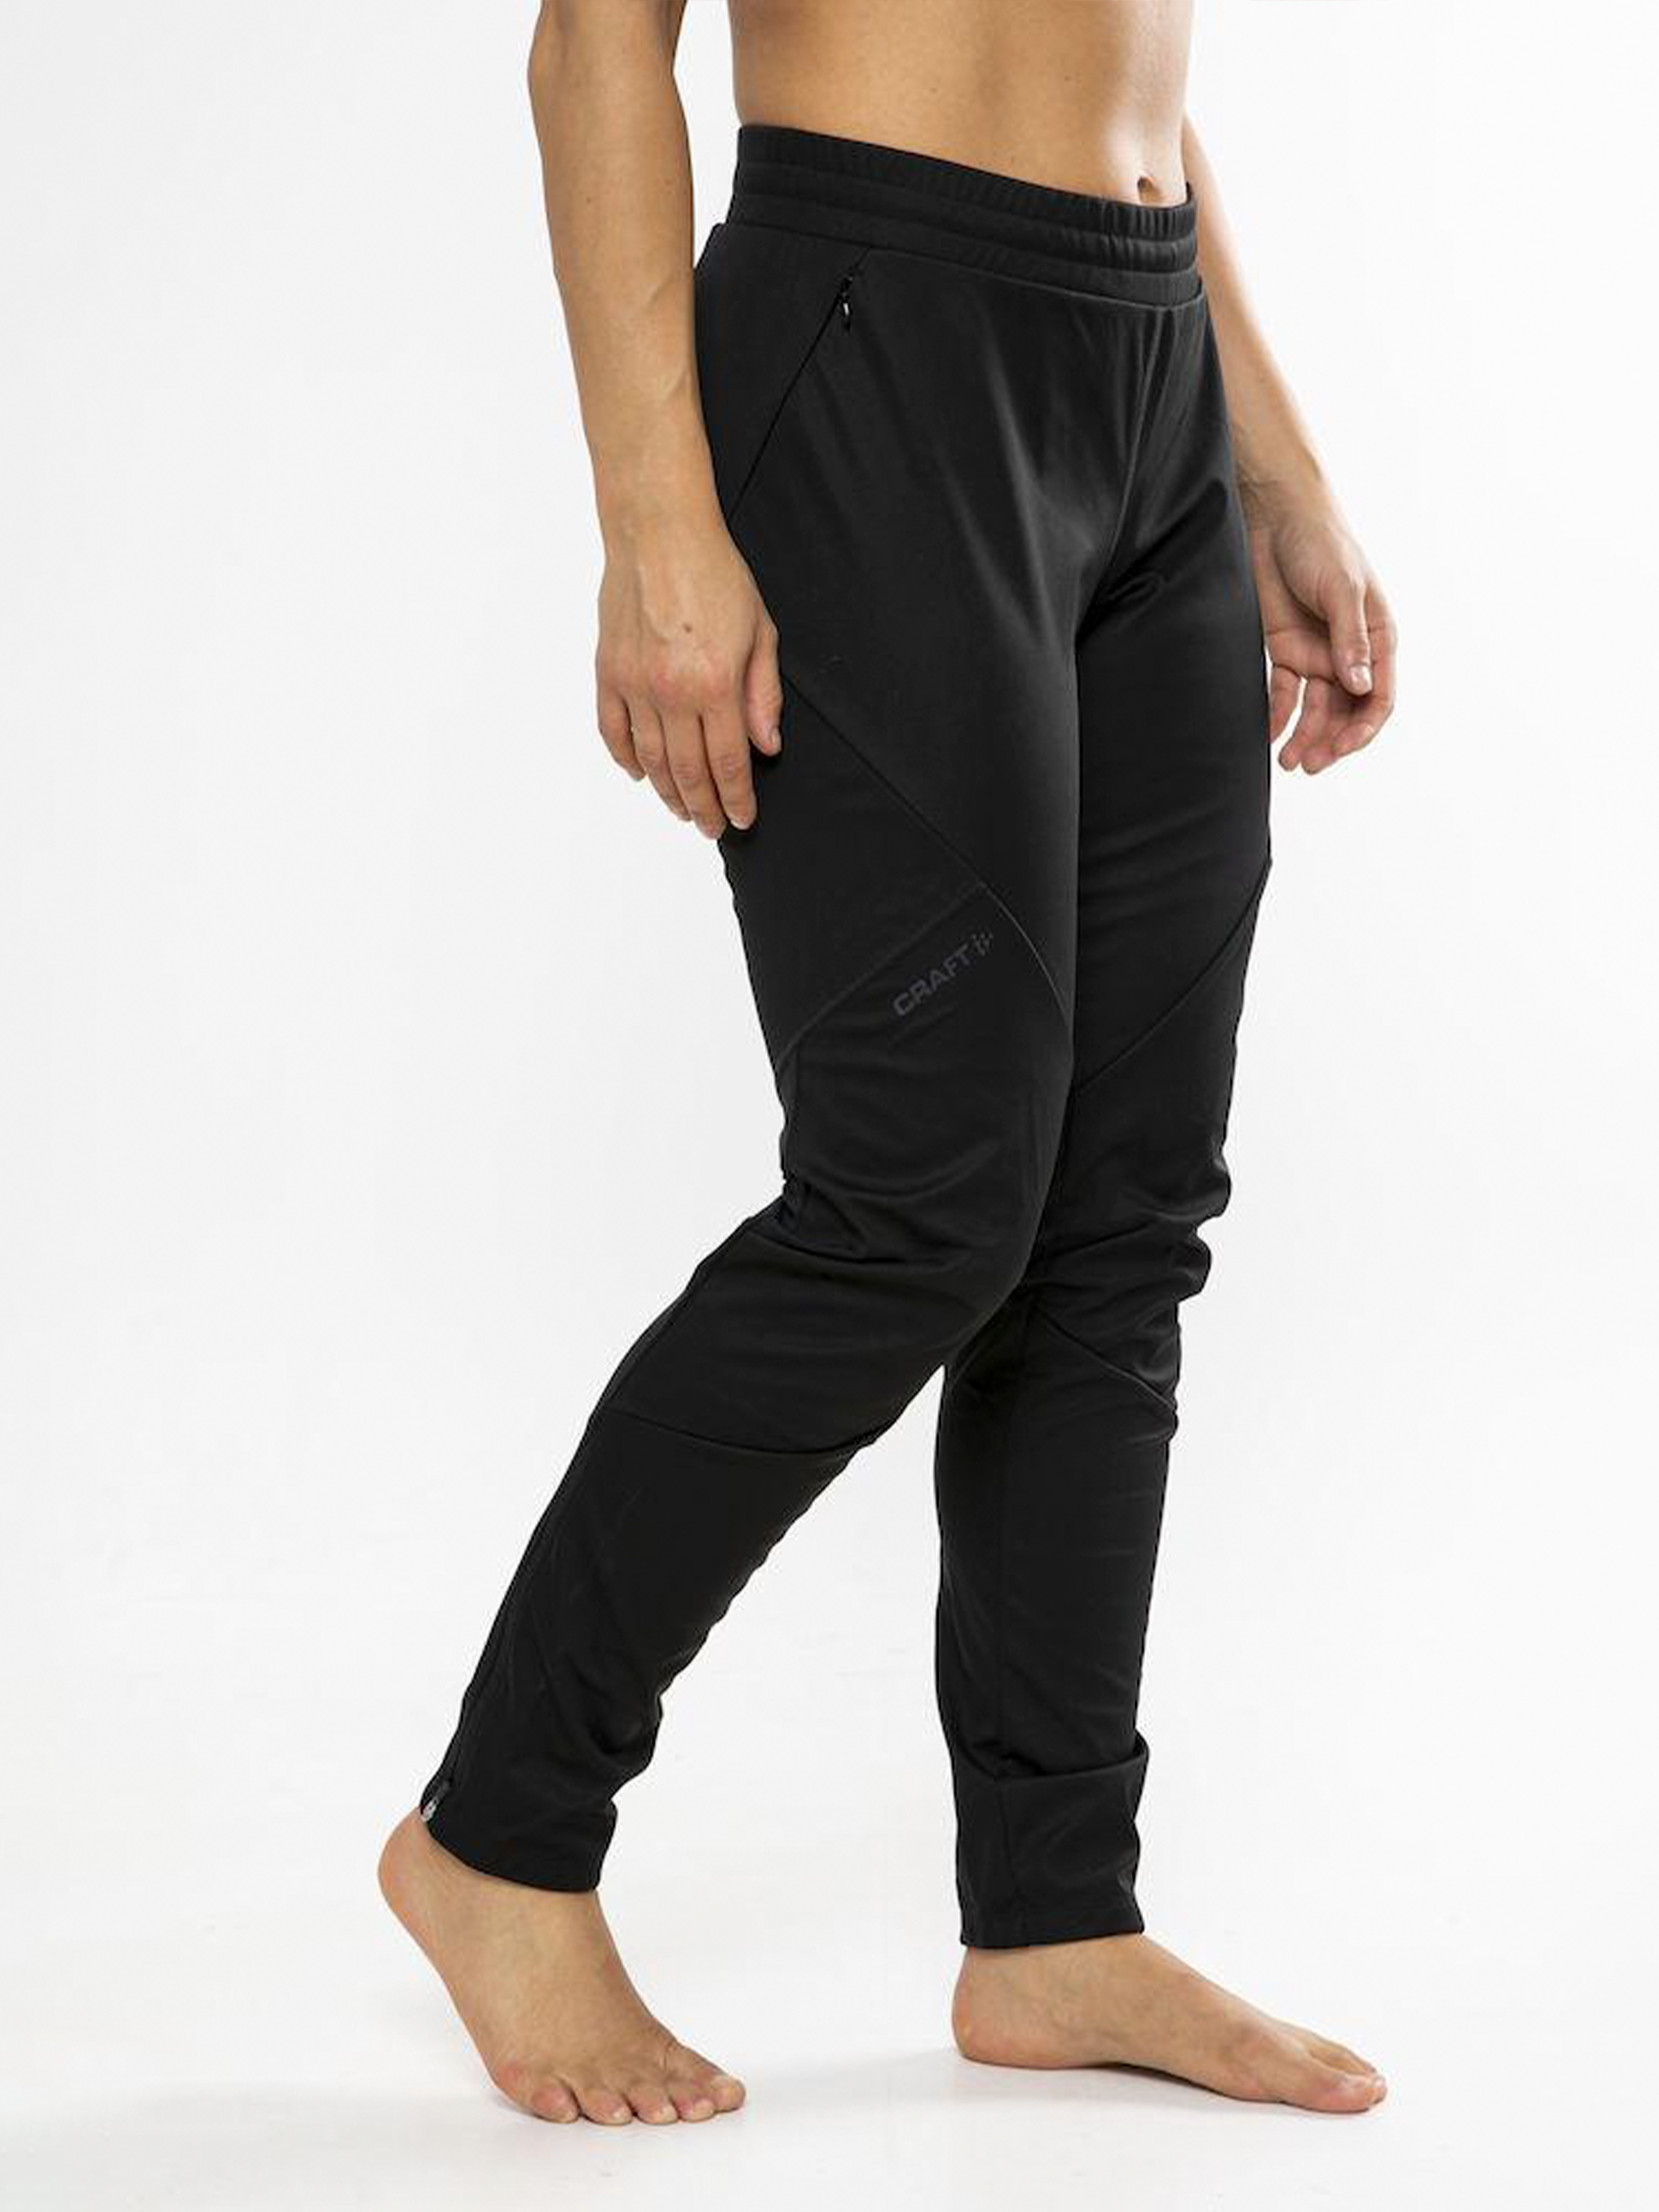 Stretch Pants For Ladies, Shop 92 items